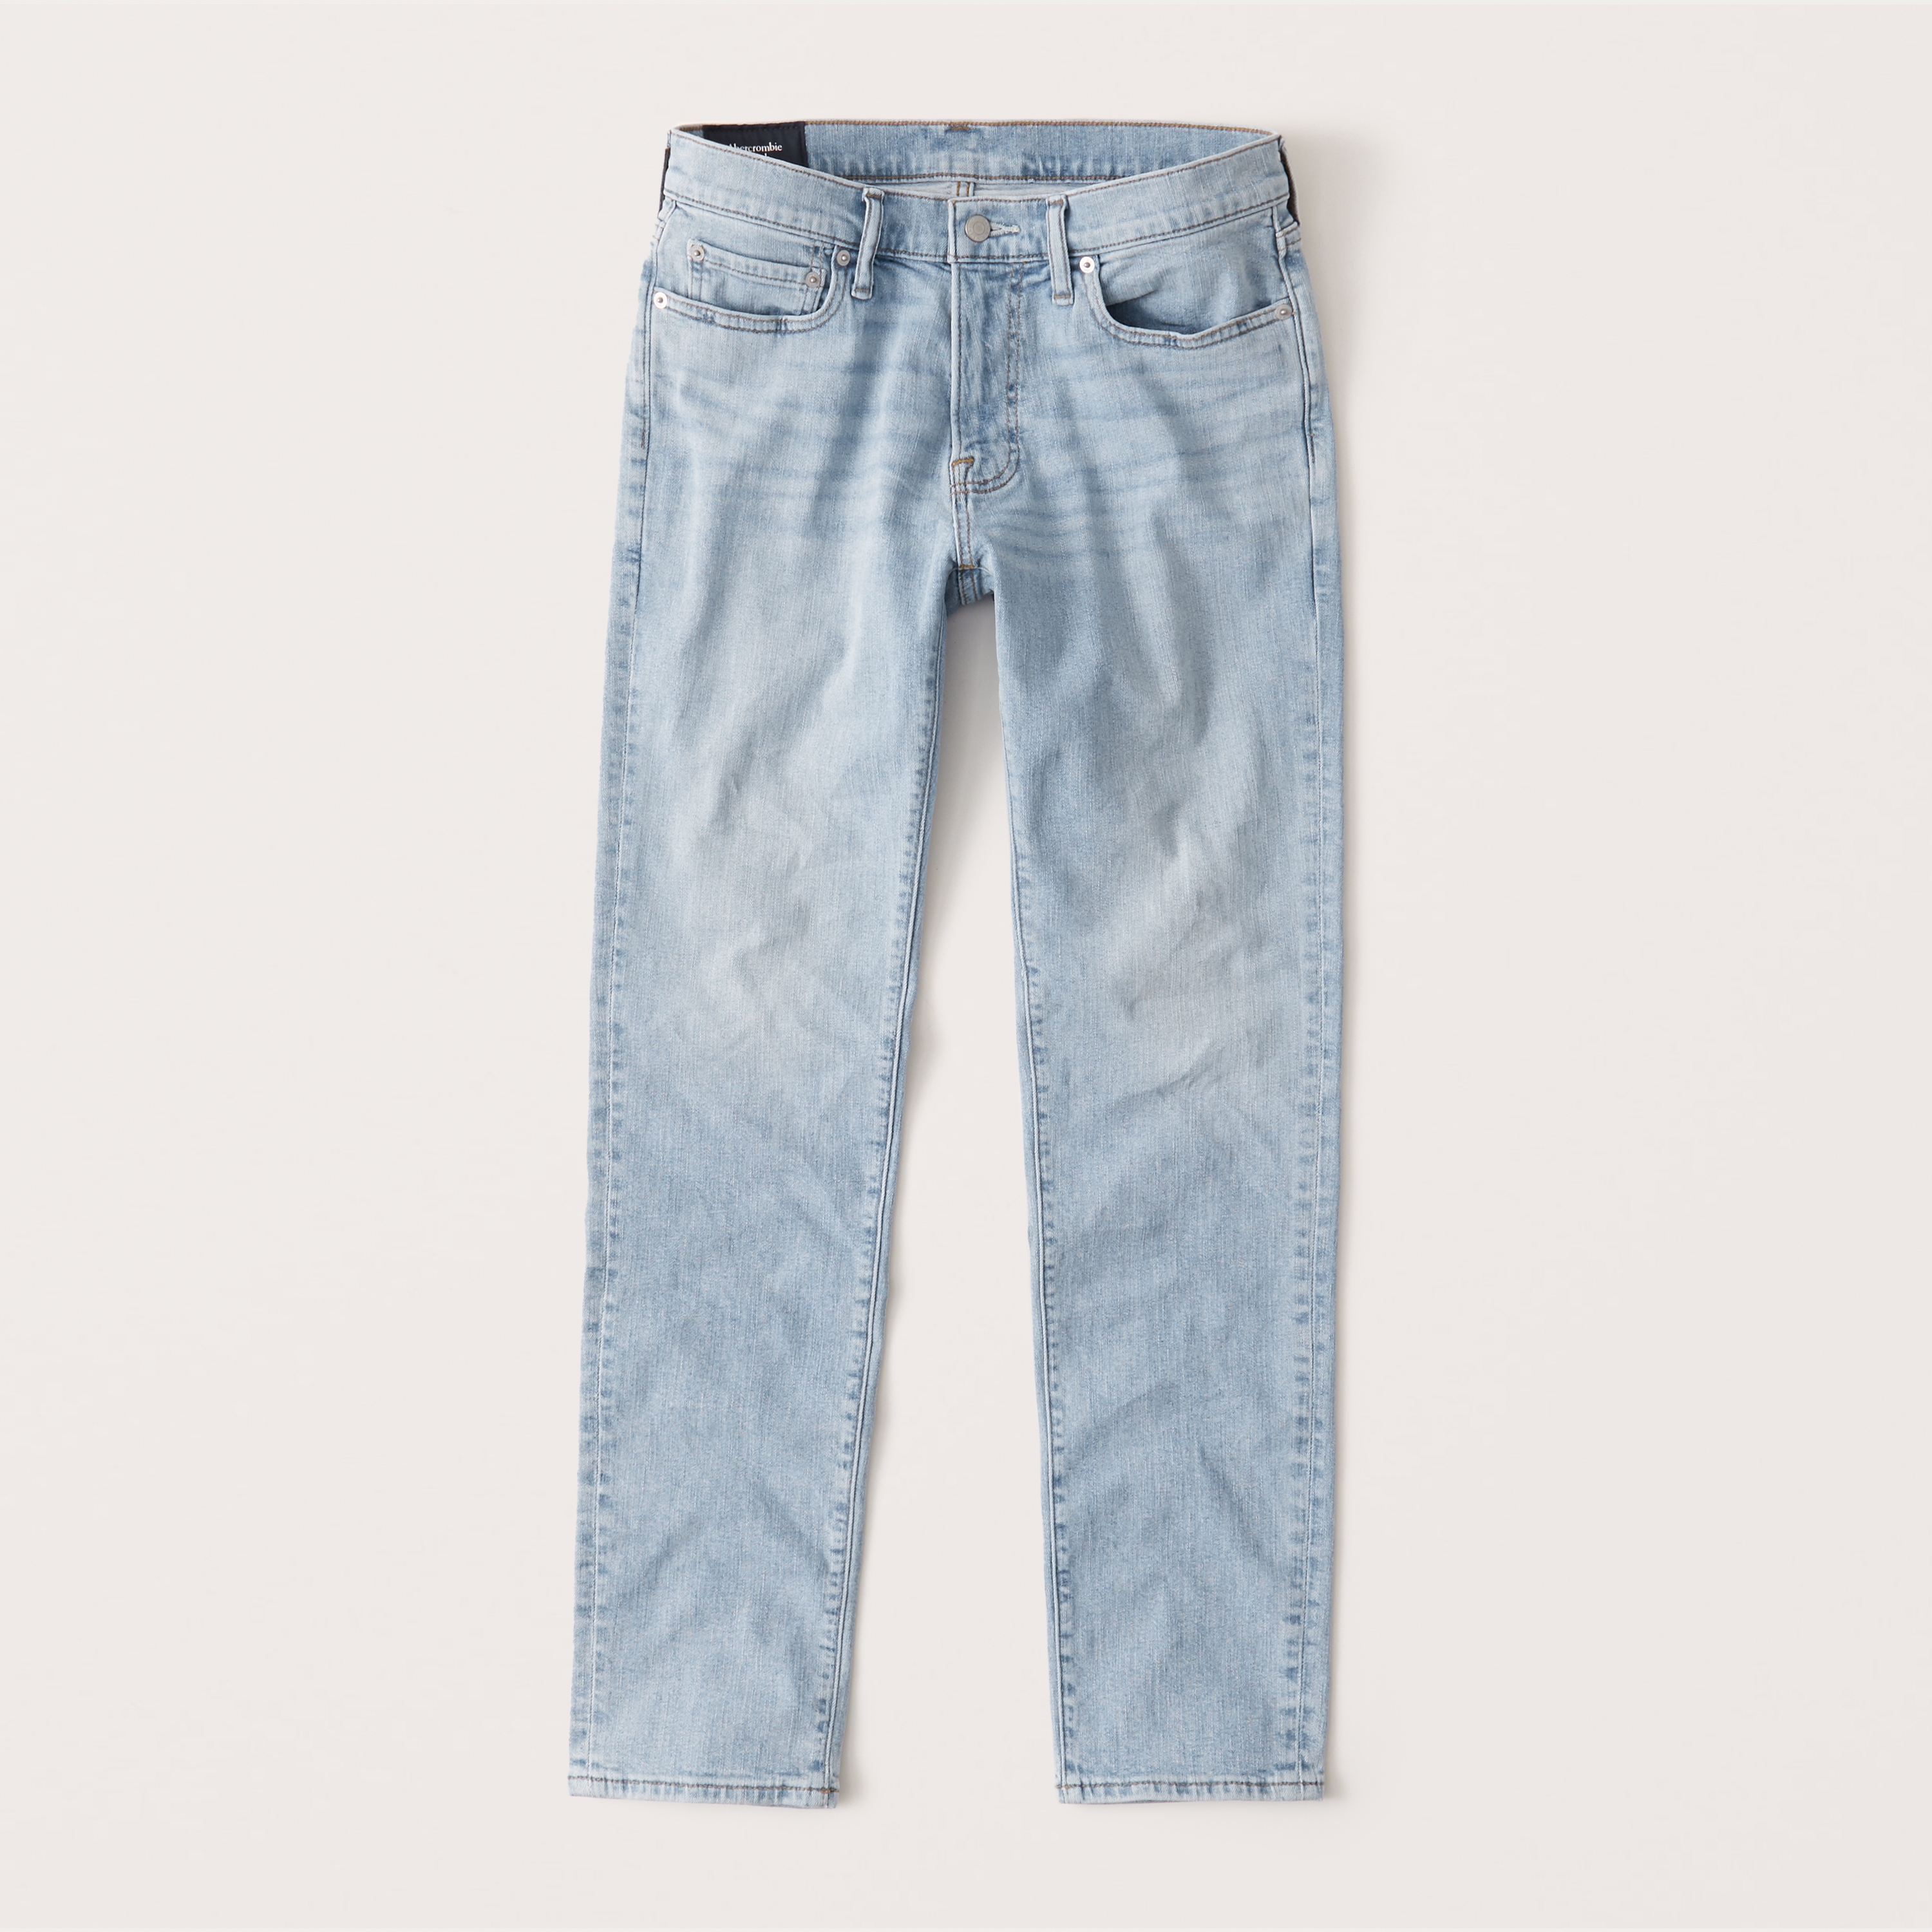 abercrombie and fitch skinny jeans